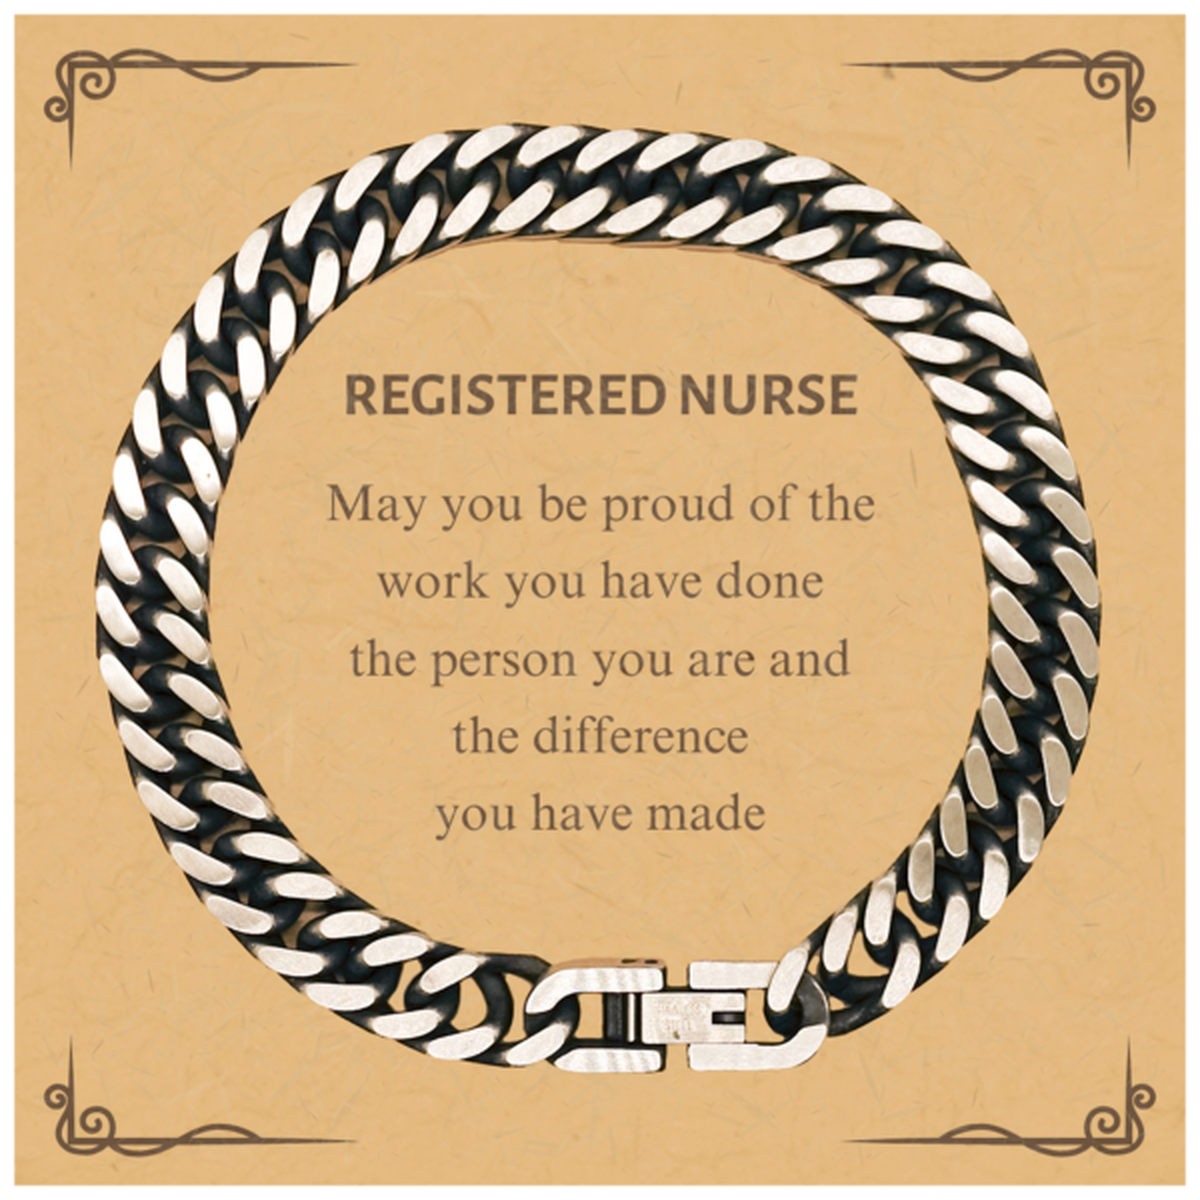 Registered Nurse May you be proud of the work you have done, Retirement Registered Nurse Cuban Link Chain Bracelet for Colleague Appreciation Gifts Amazing for Registered Nurse